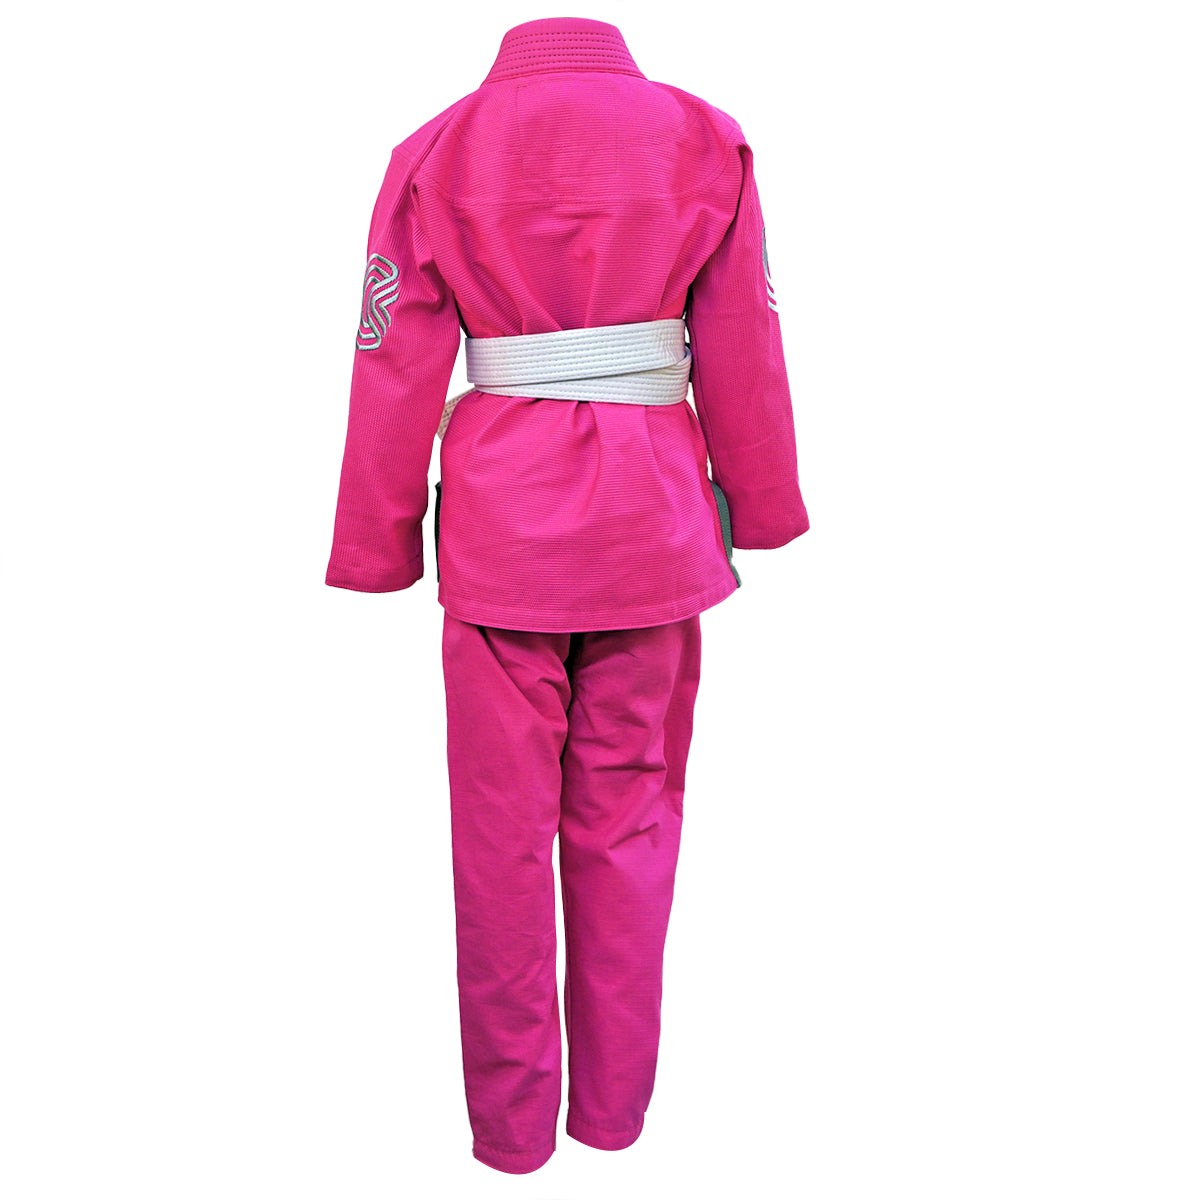 Chaos and Order Kid's Base Label V2 BJJ Gi - Pink Chaos and Order